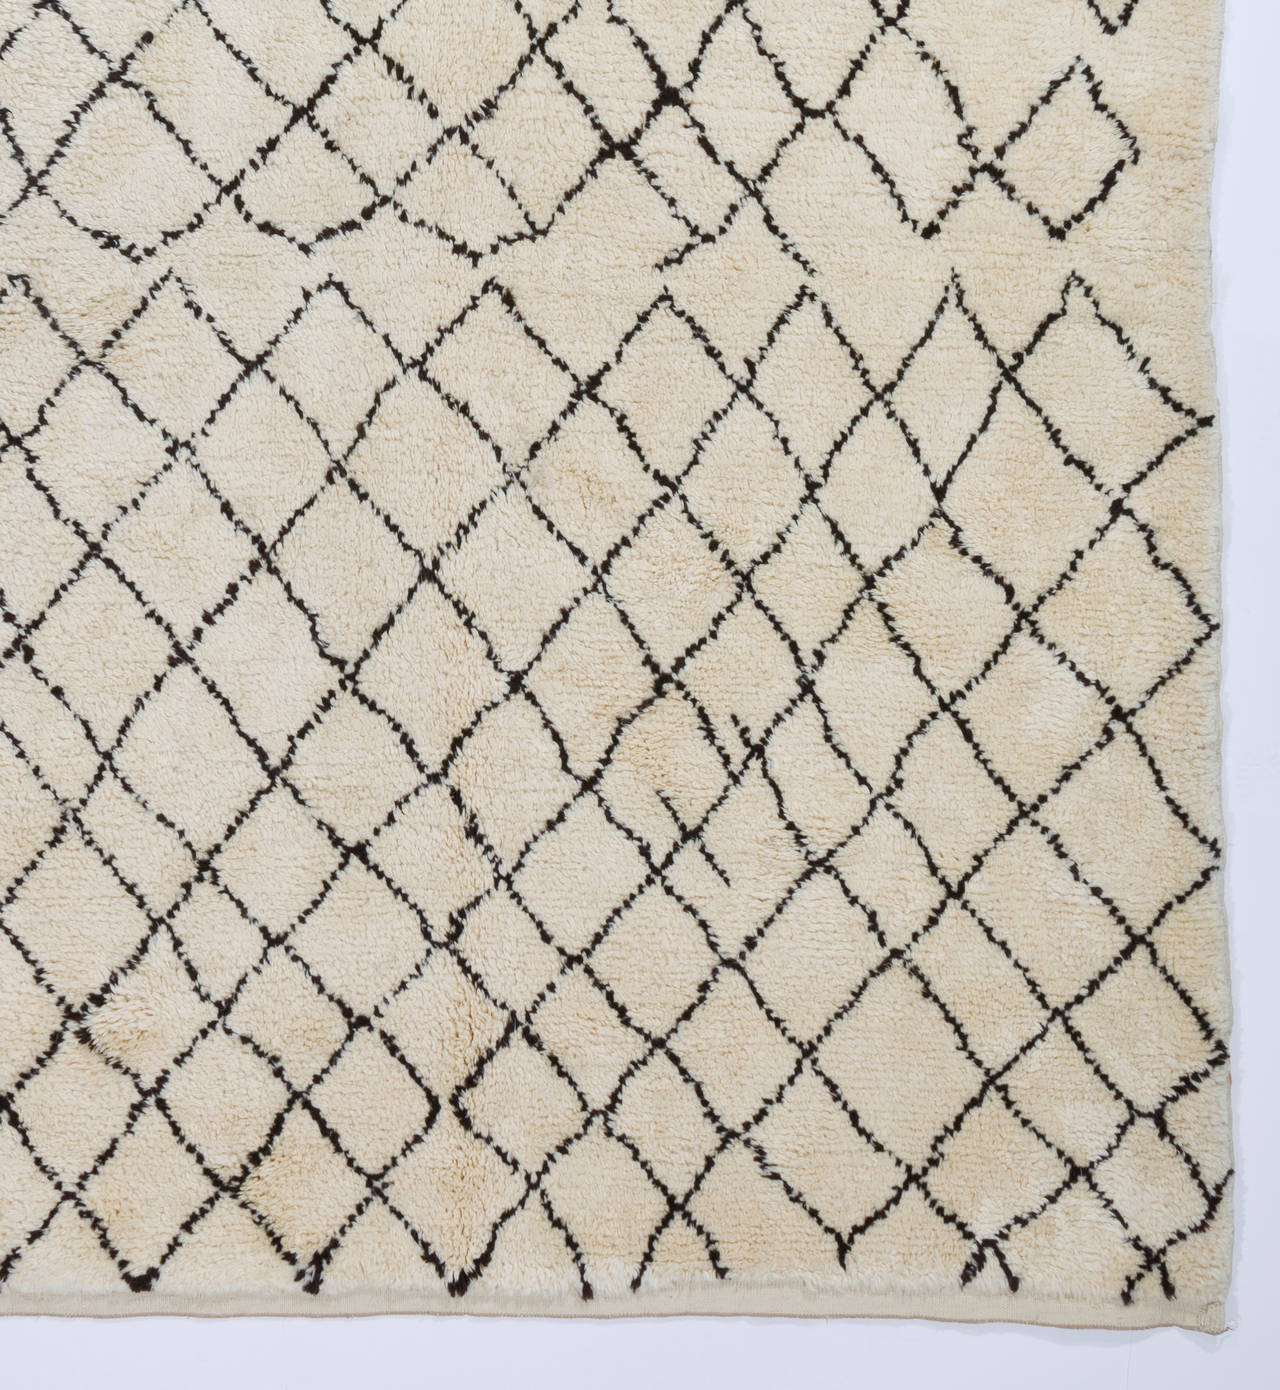 A contemporary hand-knotted Moroccan rug made of natural un-dyed wool. 
Very Soft and comfy, pleasure to walk or lay on. Available as it is, in various other sizes or made to measure in any size and color combination requested. 
Size: 5 x 8 ft.